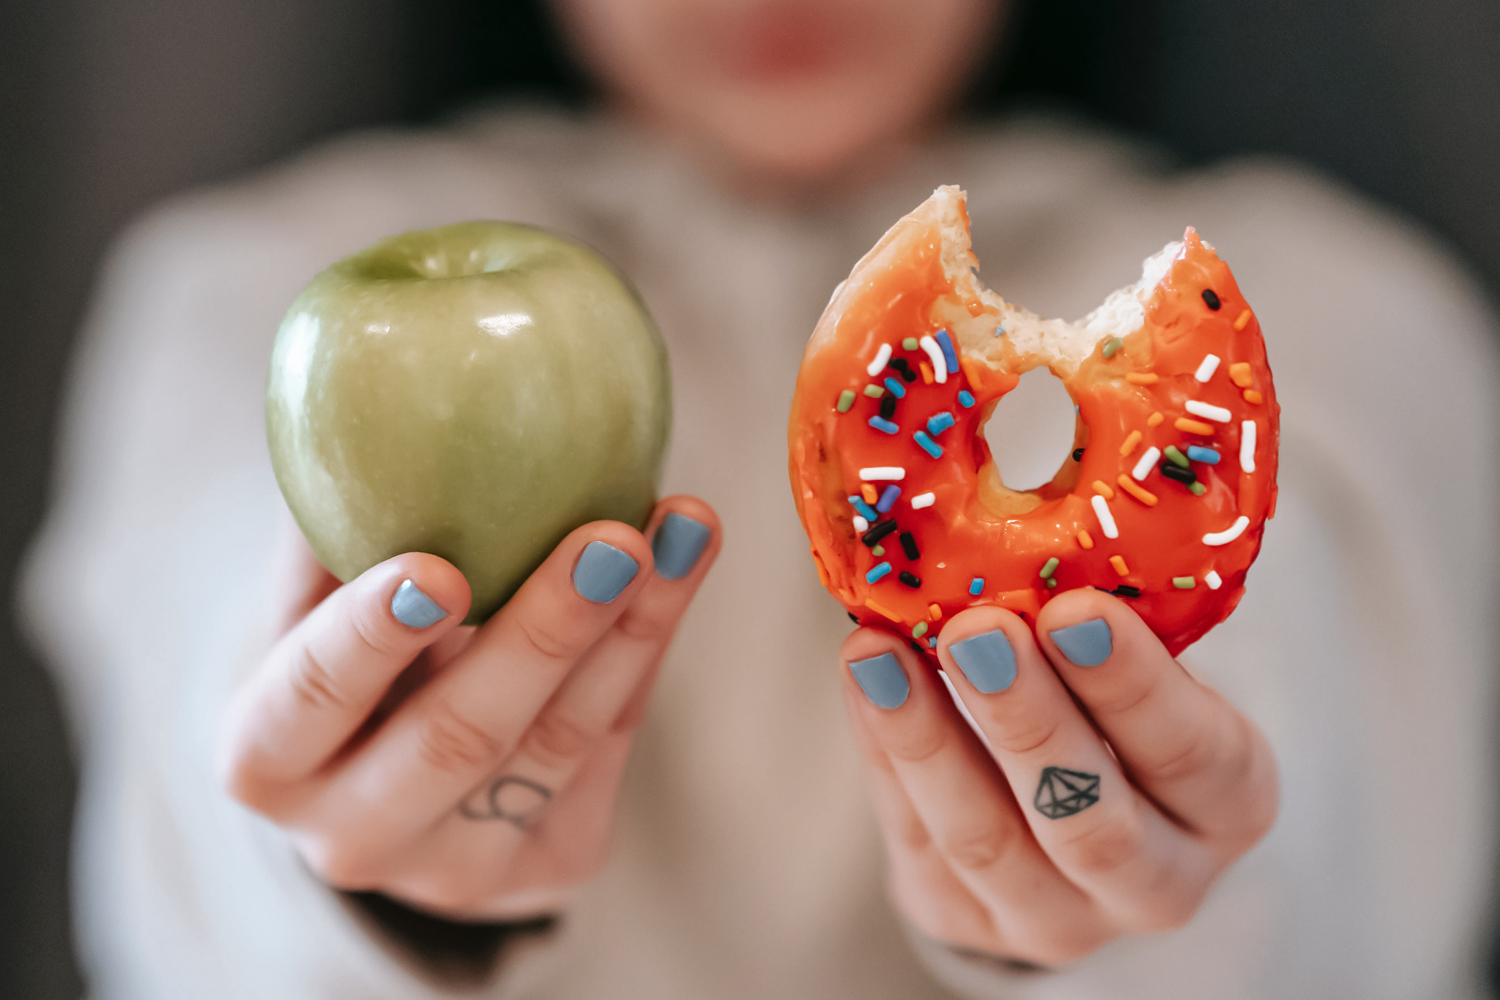 a close-up picture of two hands which are holding an apple in one hand and bitten donut in another